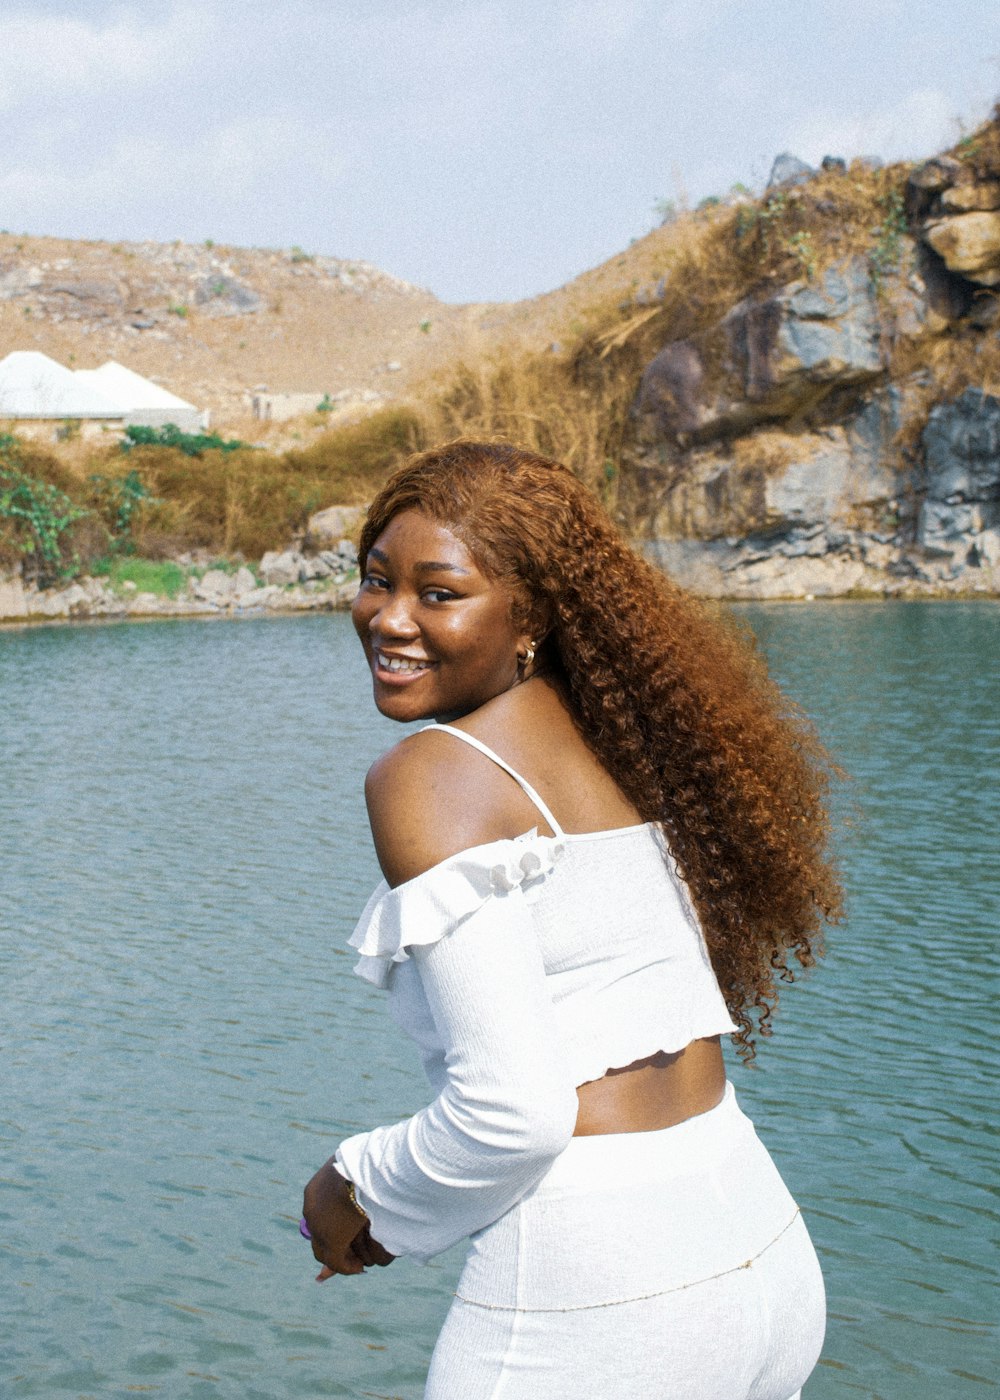 a woman in a white outfit standing in front of a body of water